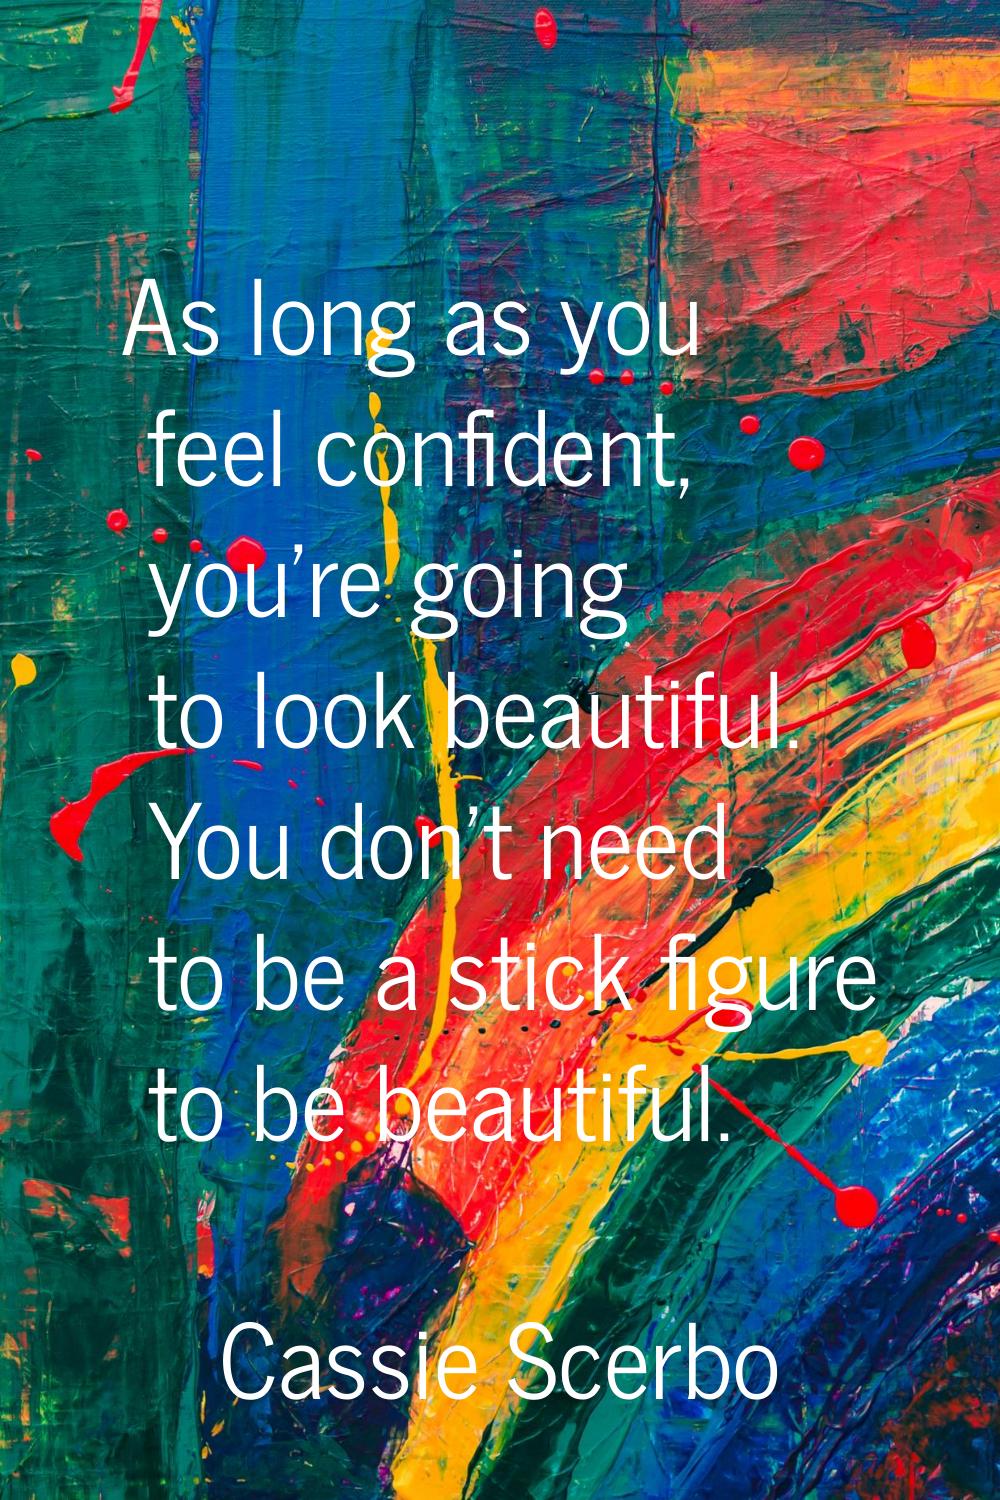 As long as you feel confident, you're going to look beautiful. You don't need to be a stick figure 